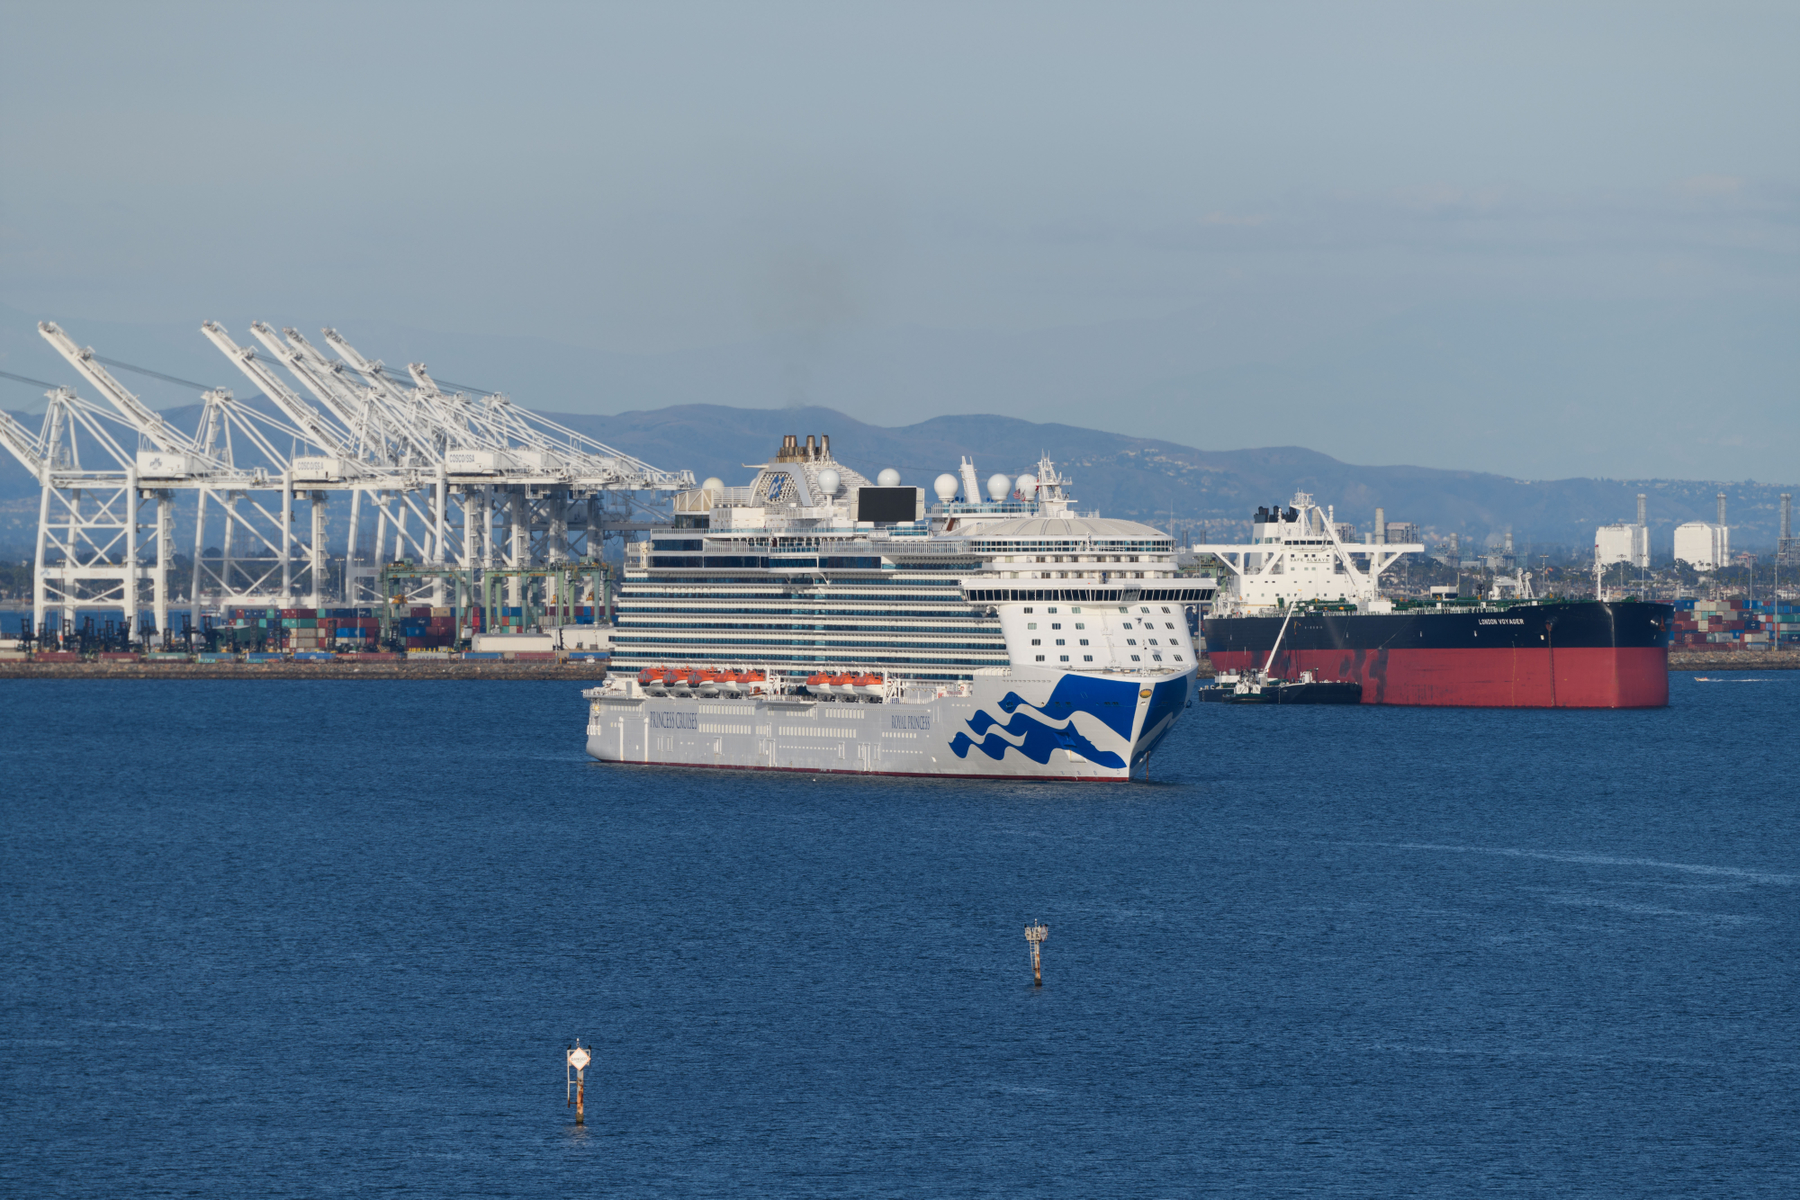 March 8, 2020I think this cruise ship may have been under COVID quarantine at this time.  Things were wildly unsettled in the cruise industry at this...